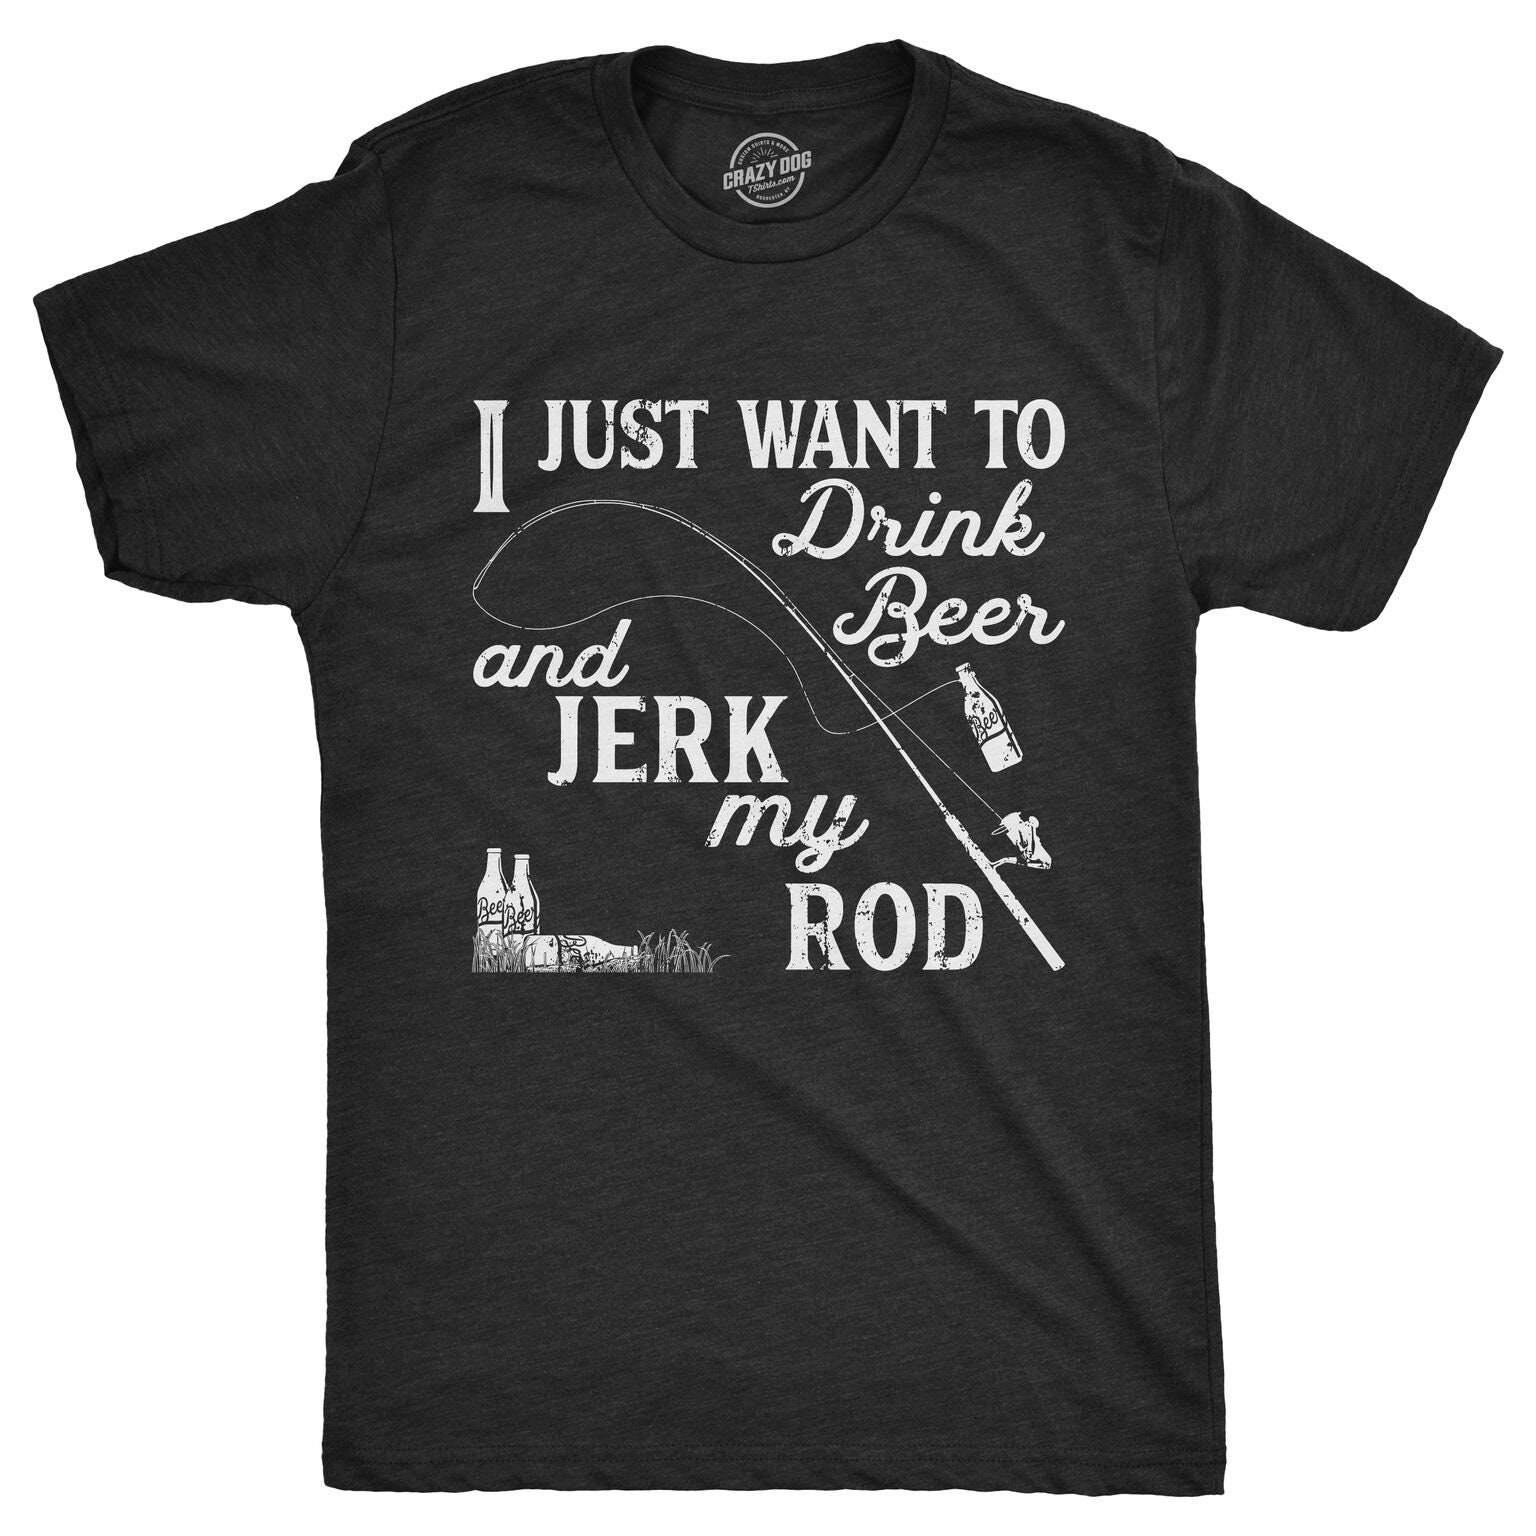 Mens I Just Want to Drink Beer and Jerk My Rod T Shirt Funny Fishing Graphic (Heather Black) - S